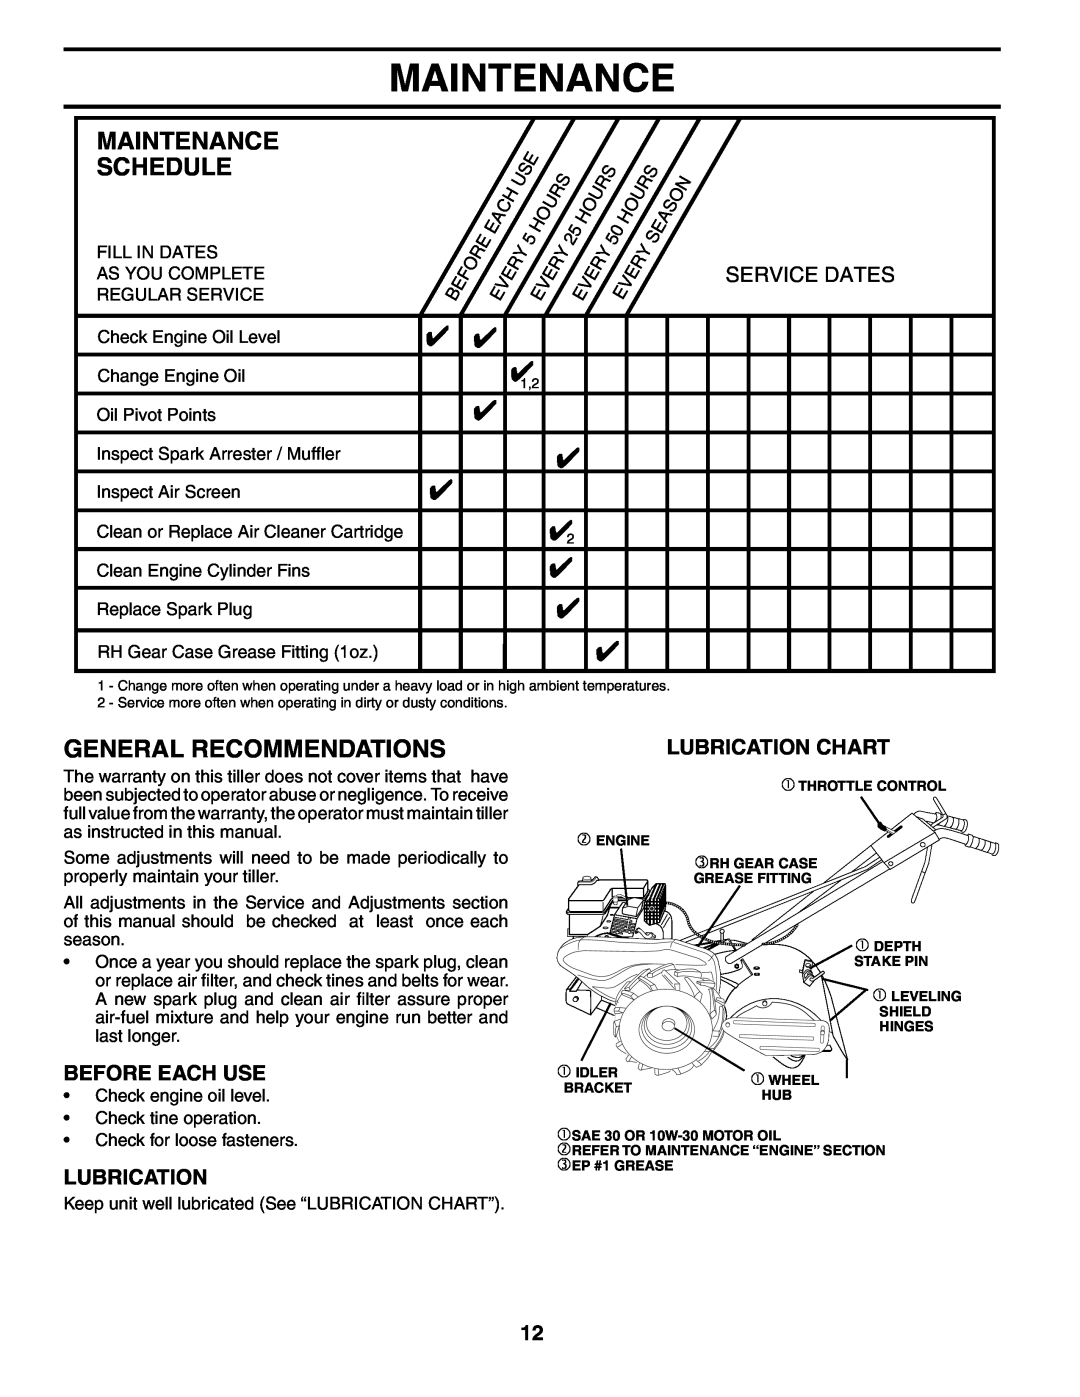 Weed Eater 186100 Maintenance Schedule, General Recommendations, Before Each Use, Lubrication Chart, Service Dates 